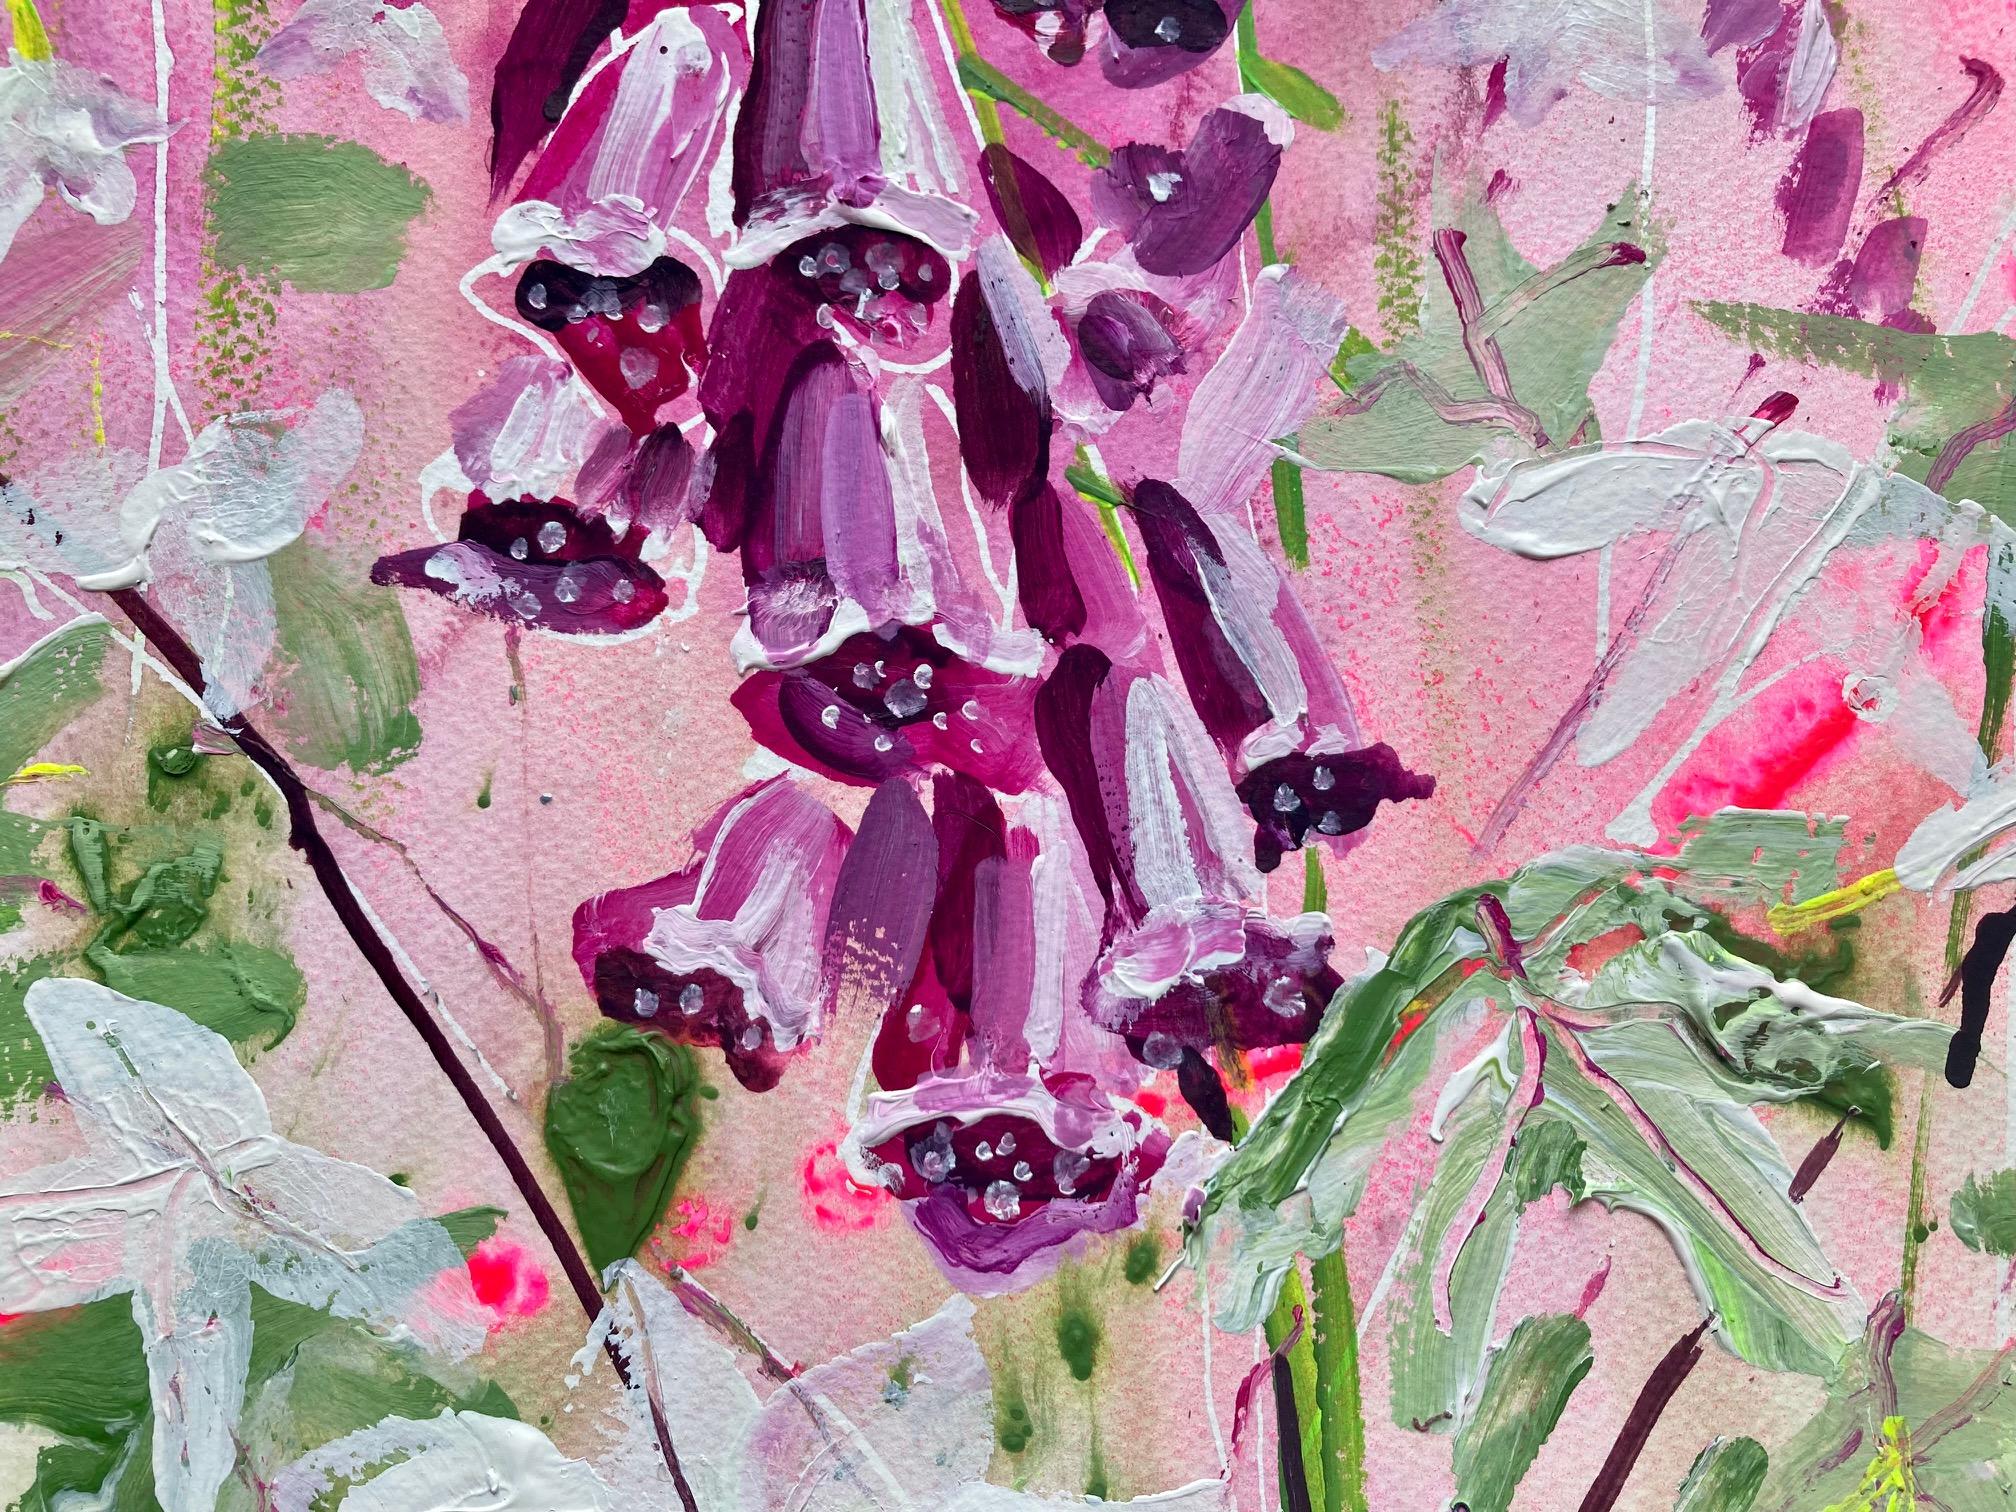 Foxglove bells for busy bees by Rachael Dalzell. Acrylic on paper, framed. For Sale 1